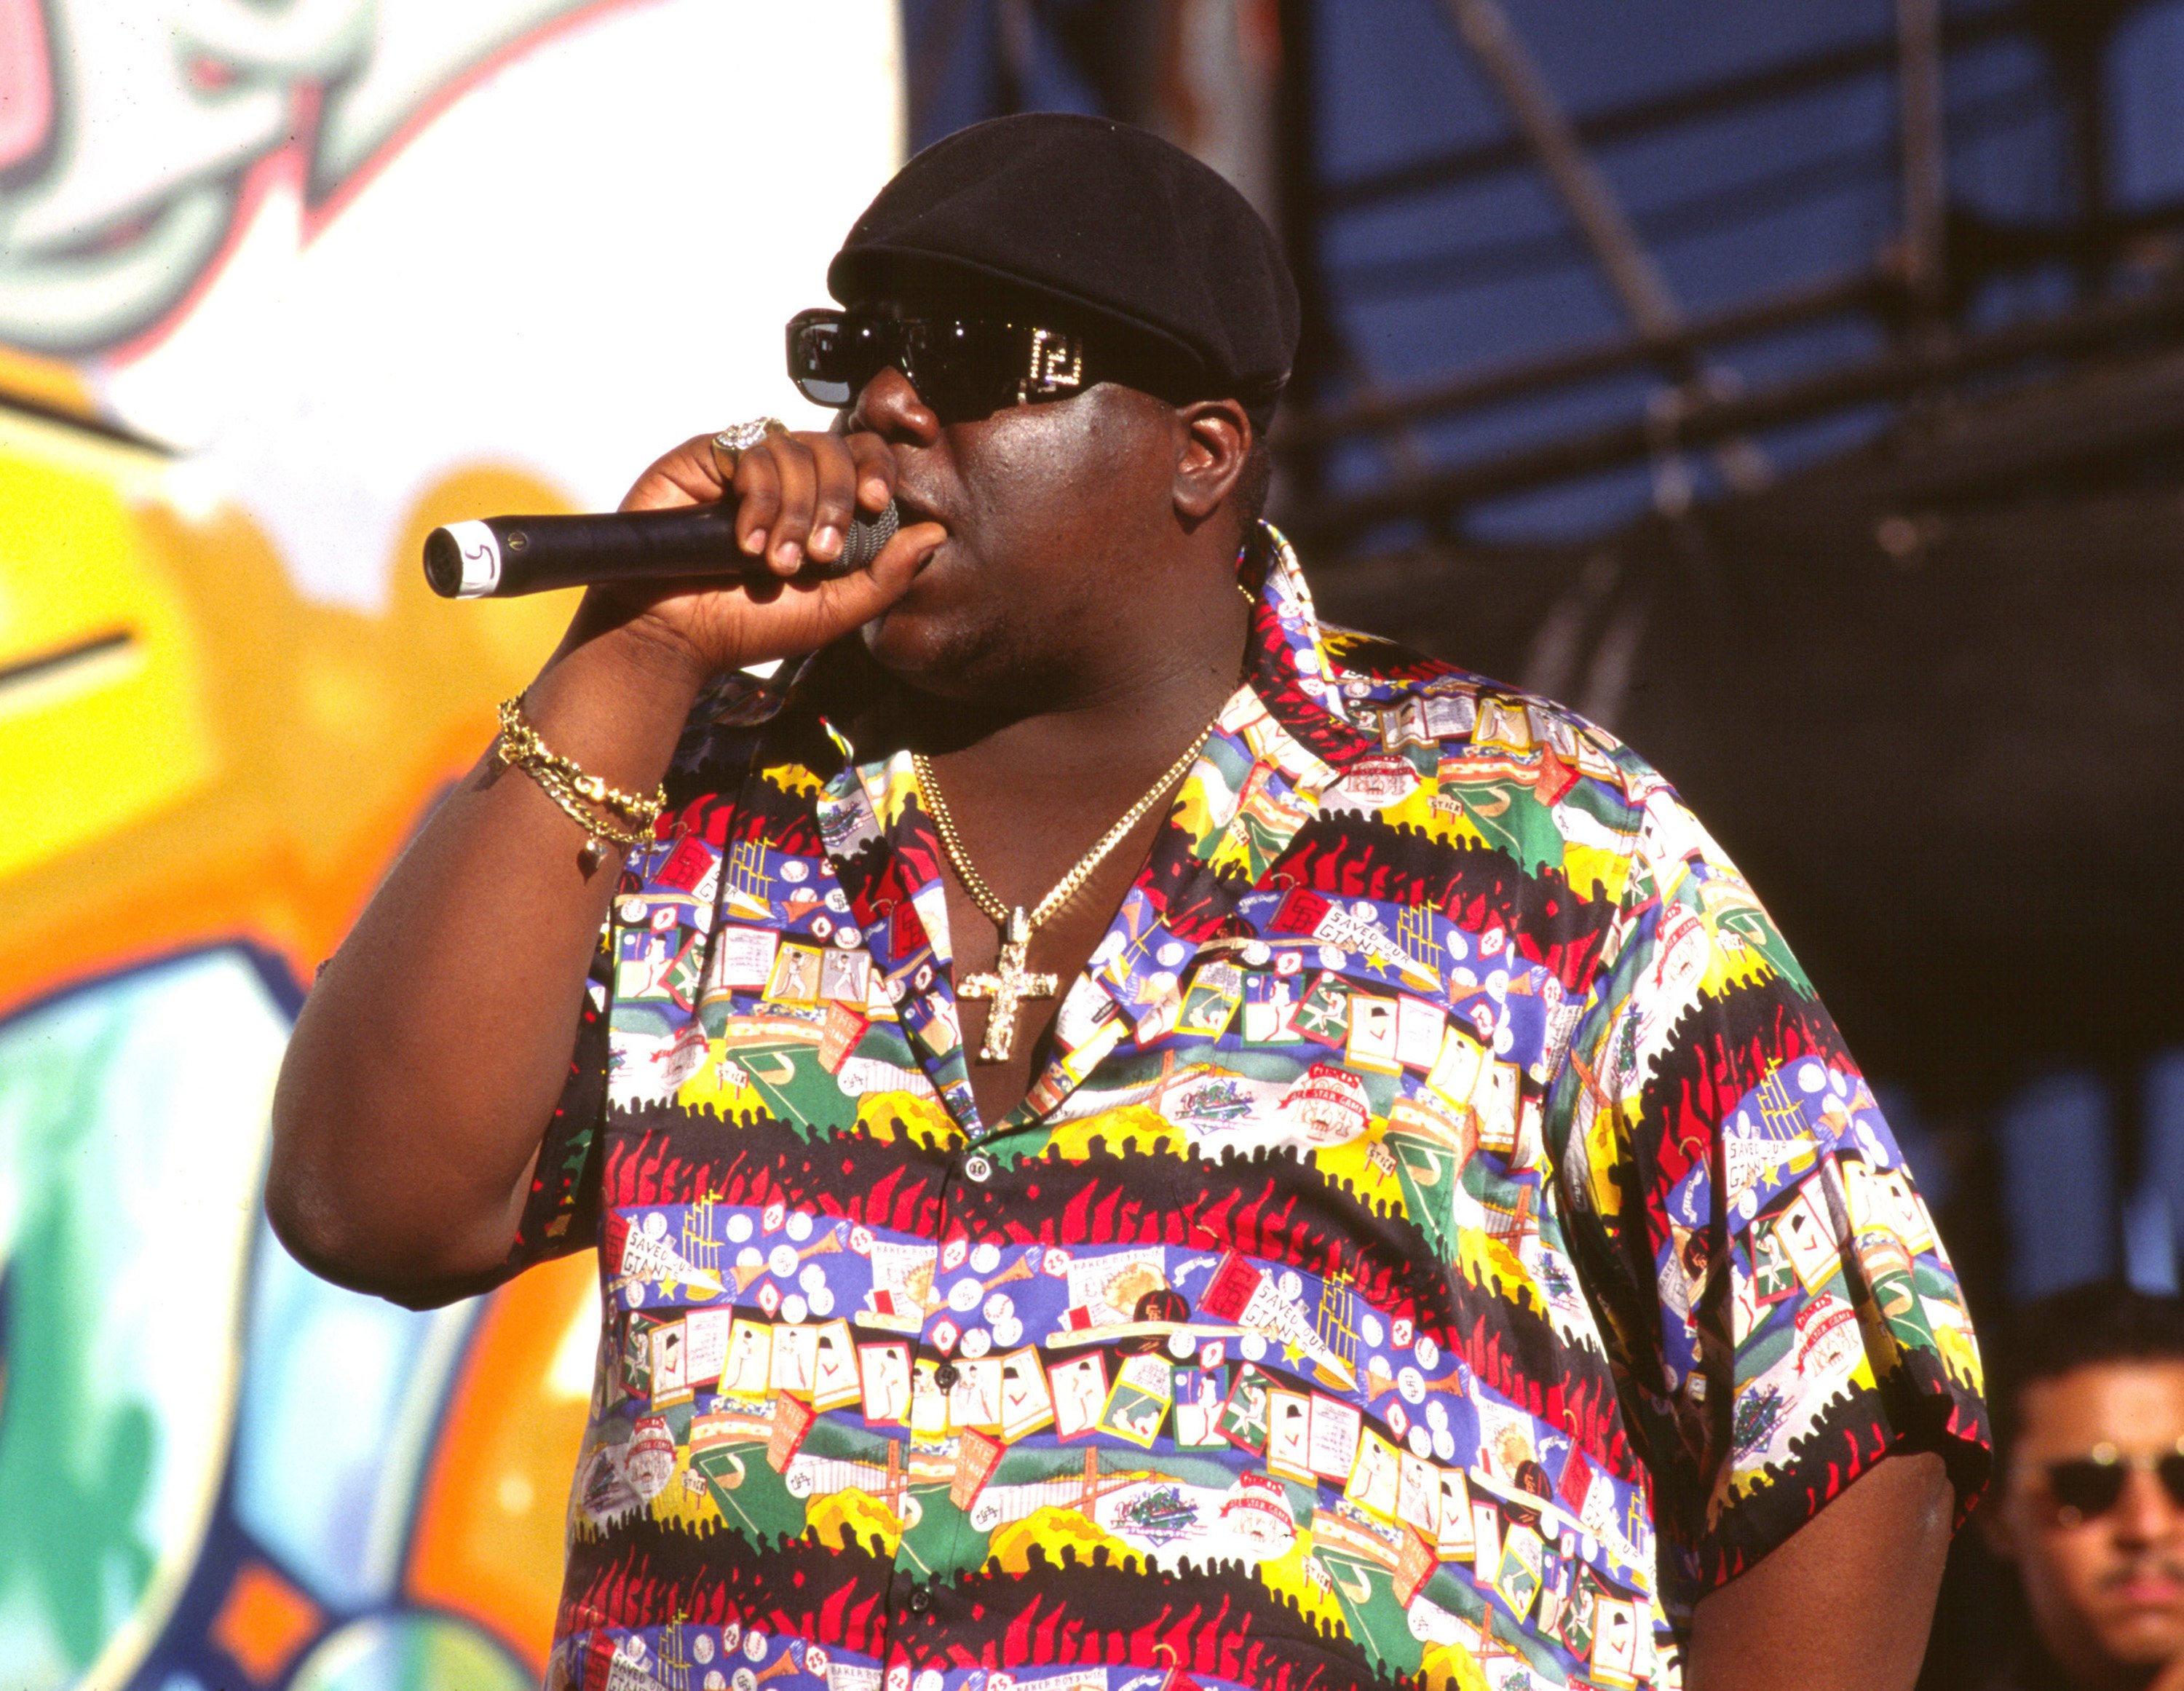 Notorious B.I.G. rapping onstage at a concert in 1995